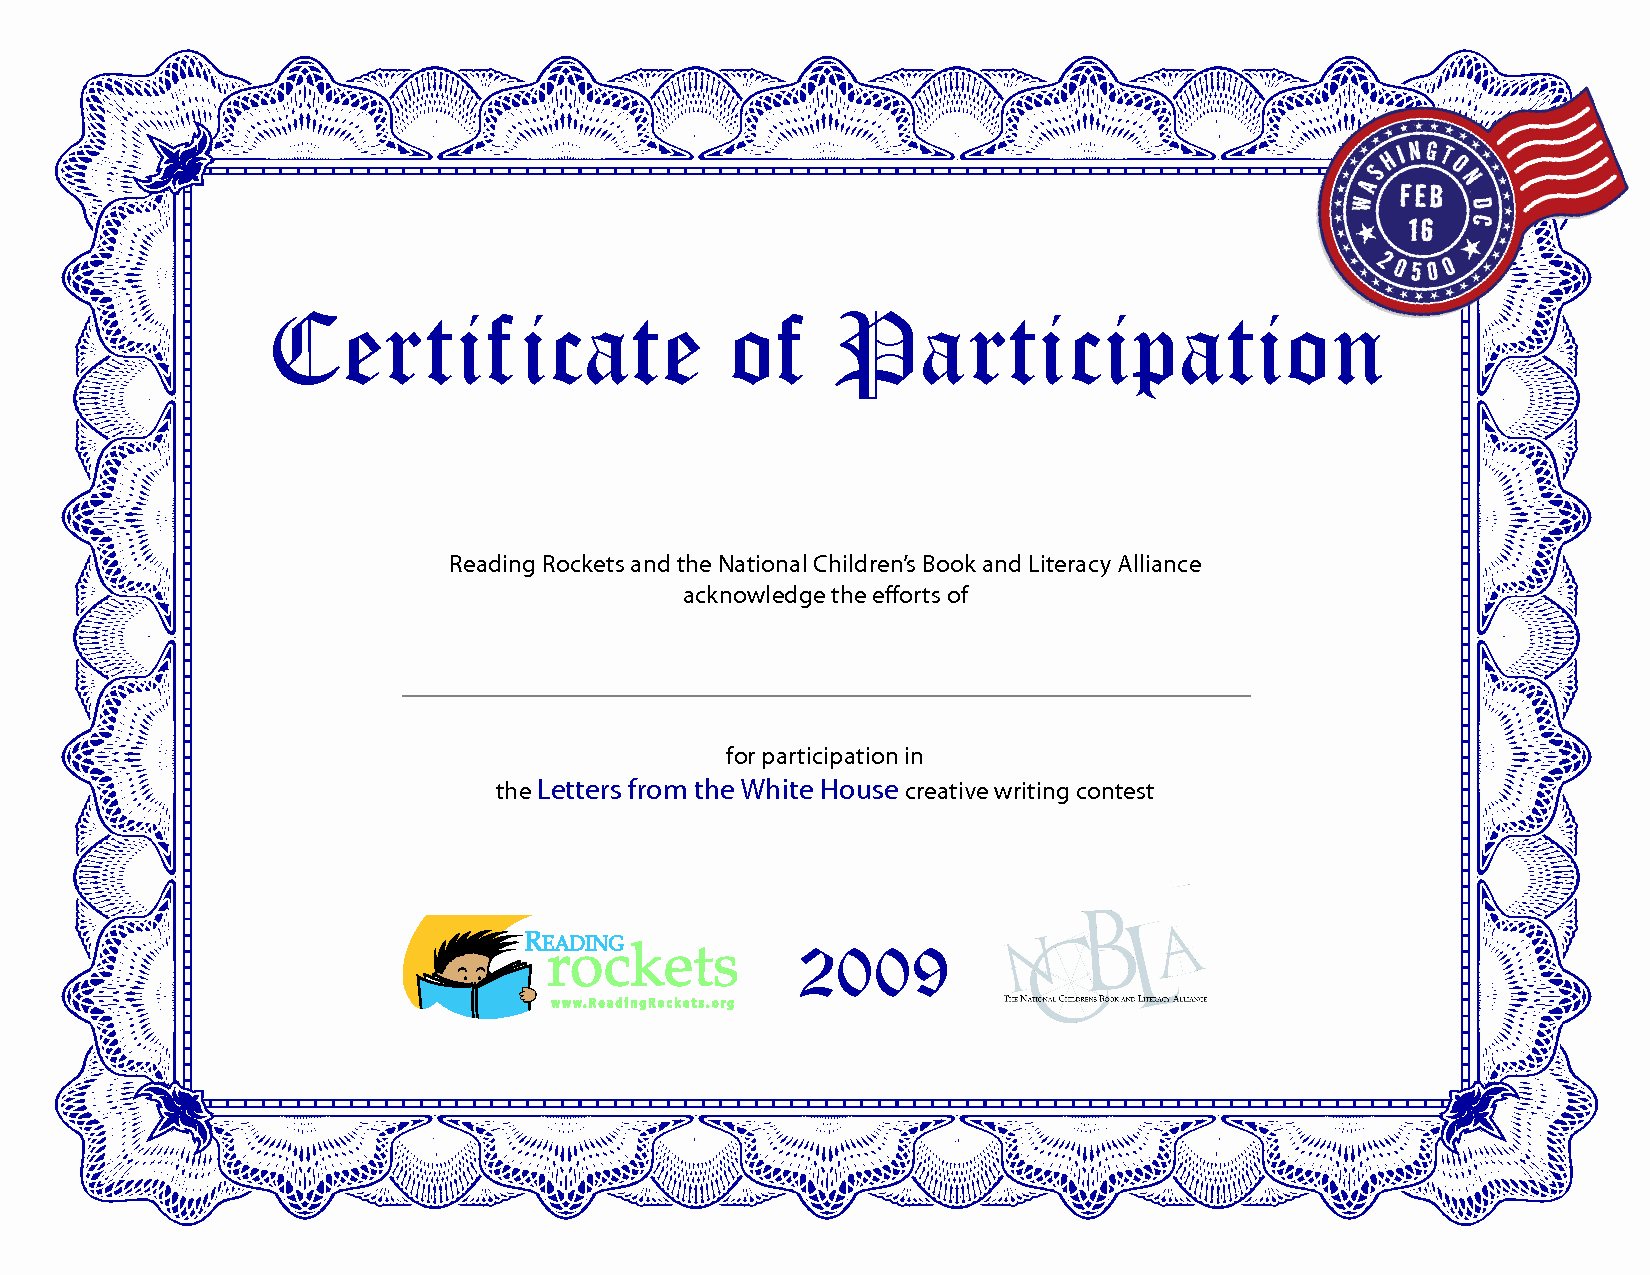 30 Certificate Of Participation Pdf | Pryncepality Within Certificate Of Participation Template Pdf